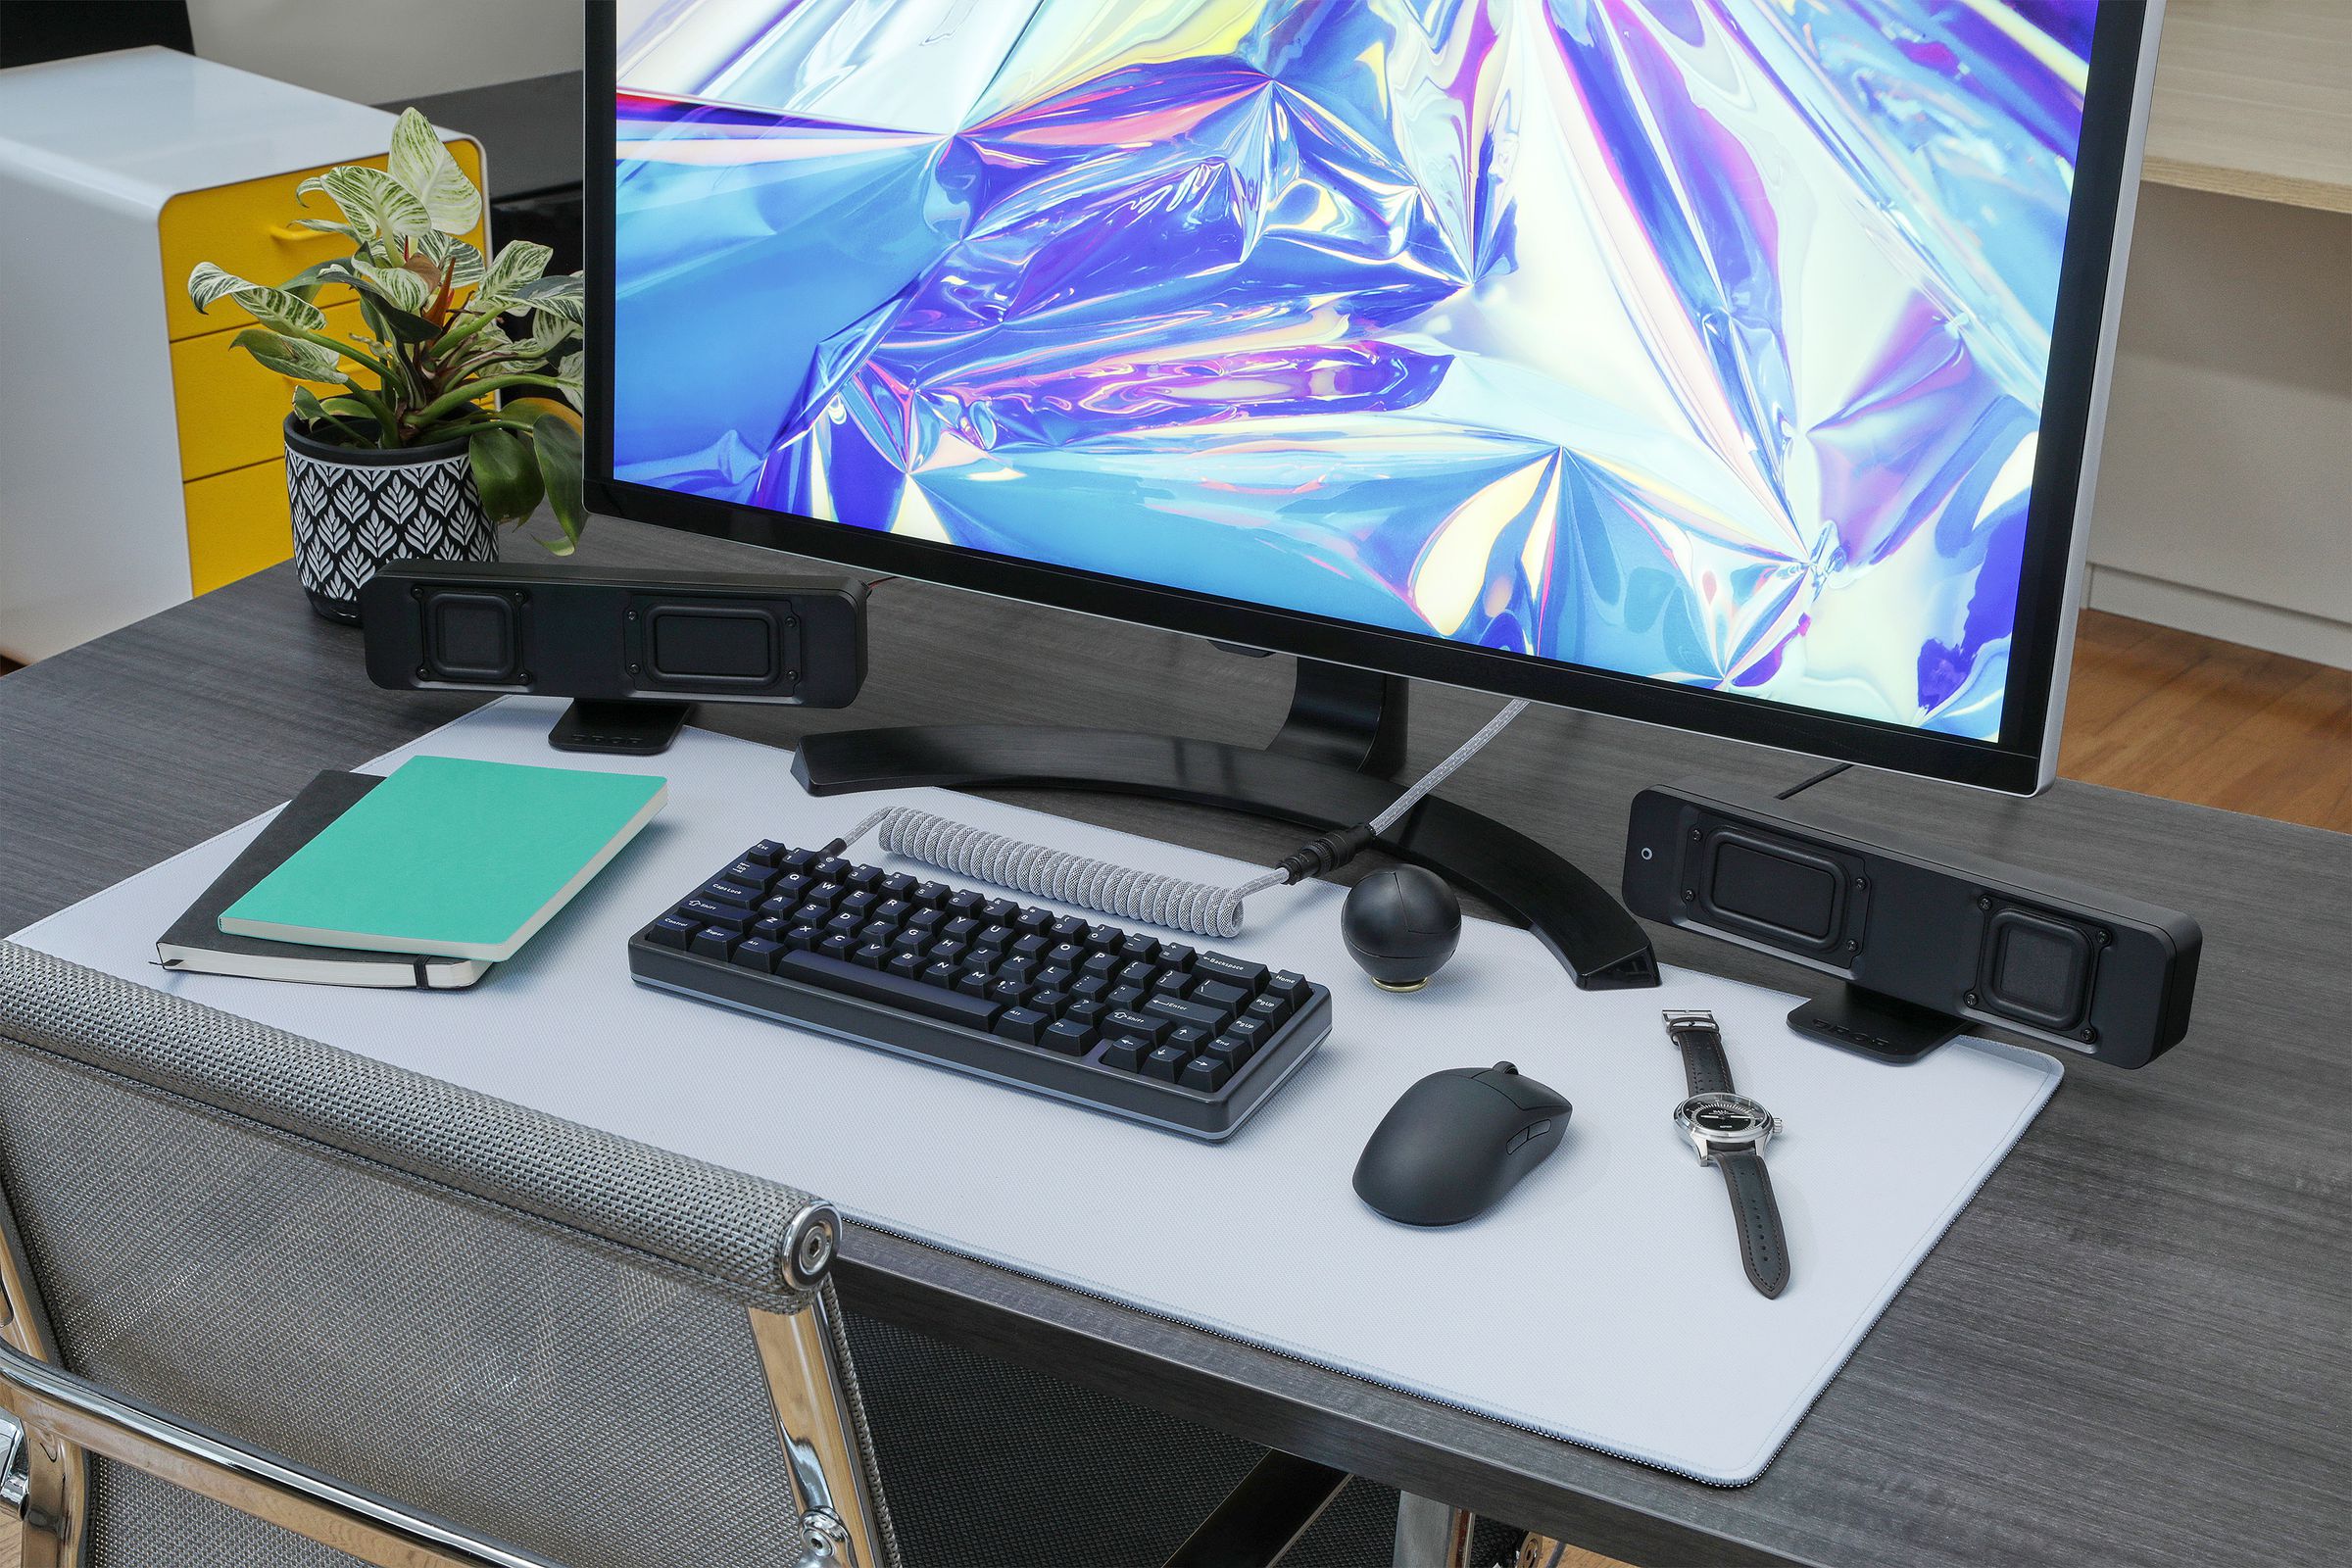 A desktop with a full PC setup including a keyboard, mouse, deskmat and the Drop BMR1 Nearfield Monitors.